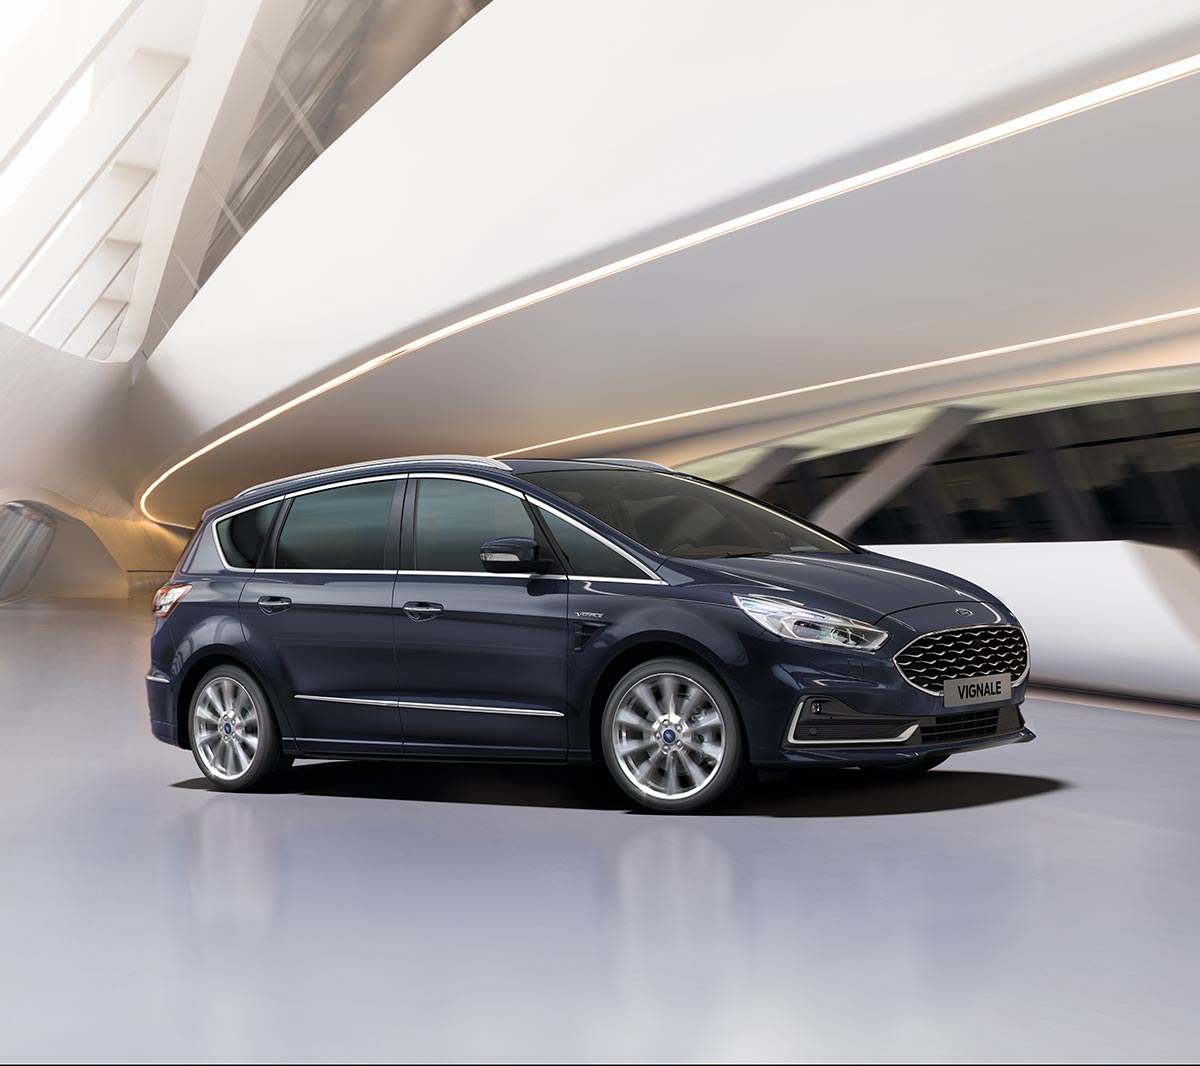 Ford S-MAX Vignale front view of the car